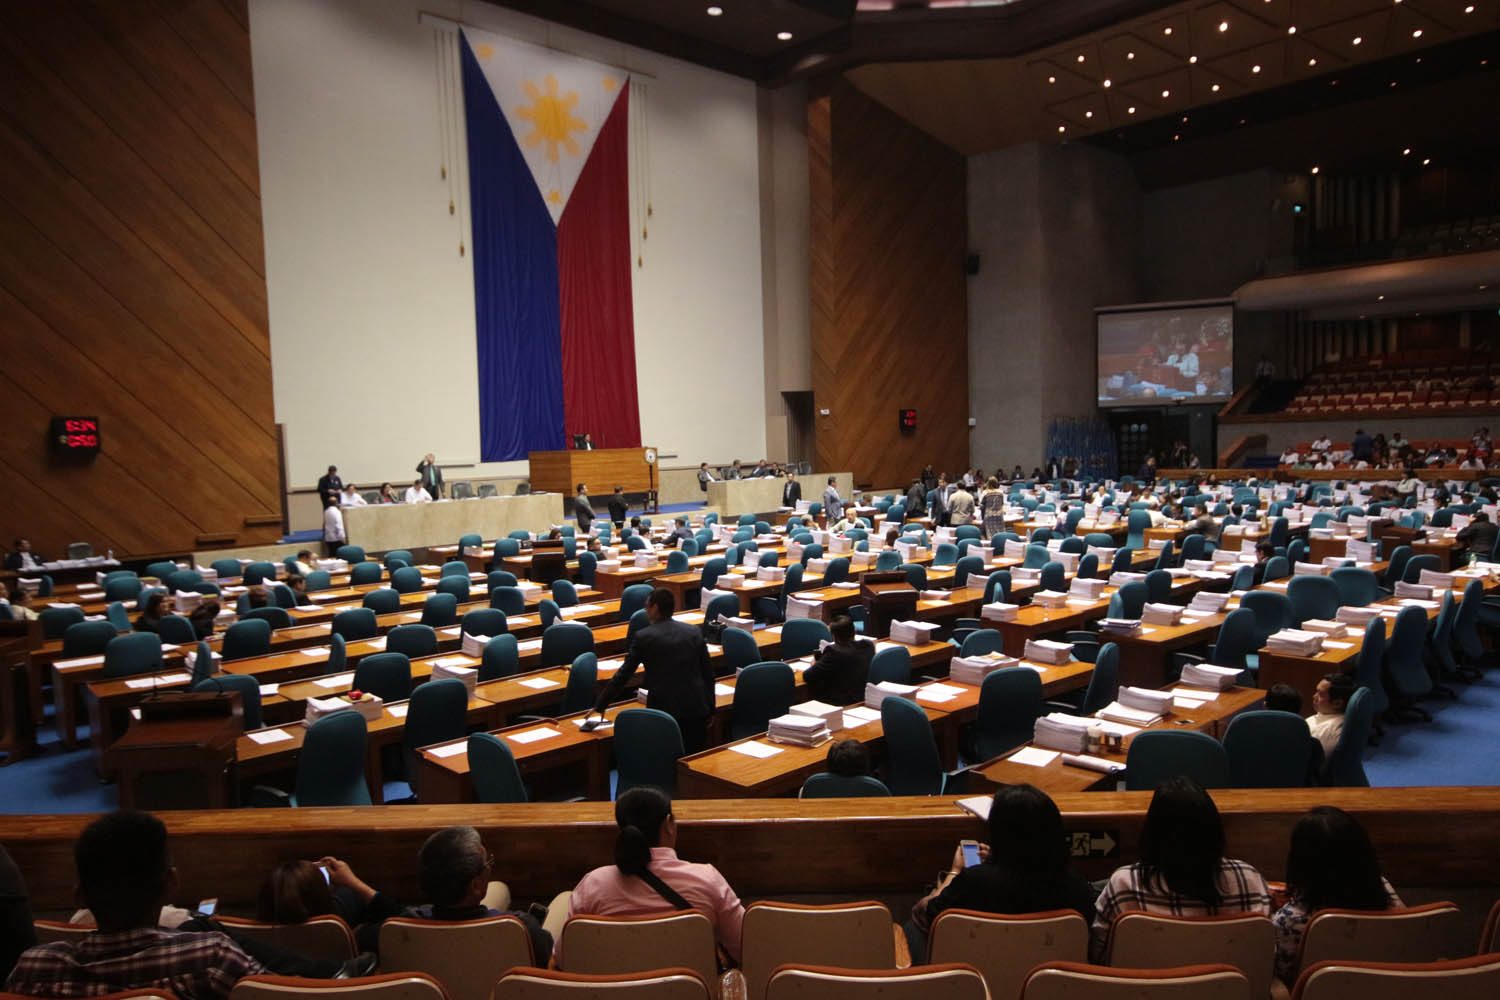 ‘Record attendance’ in House? But Atienza says lawmakers leave after roll call